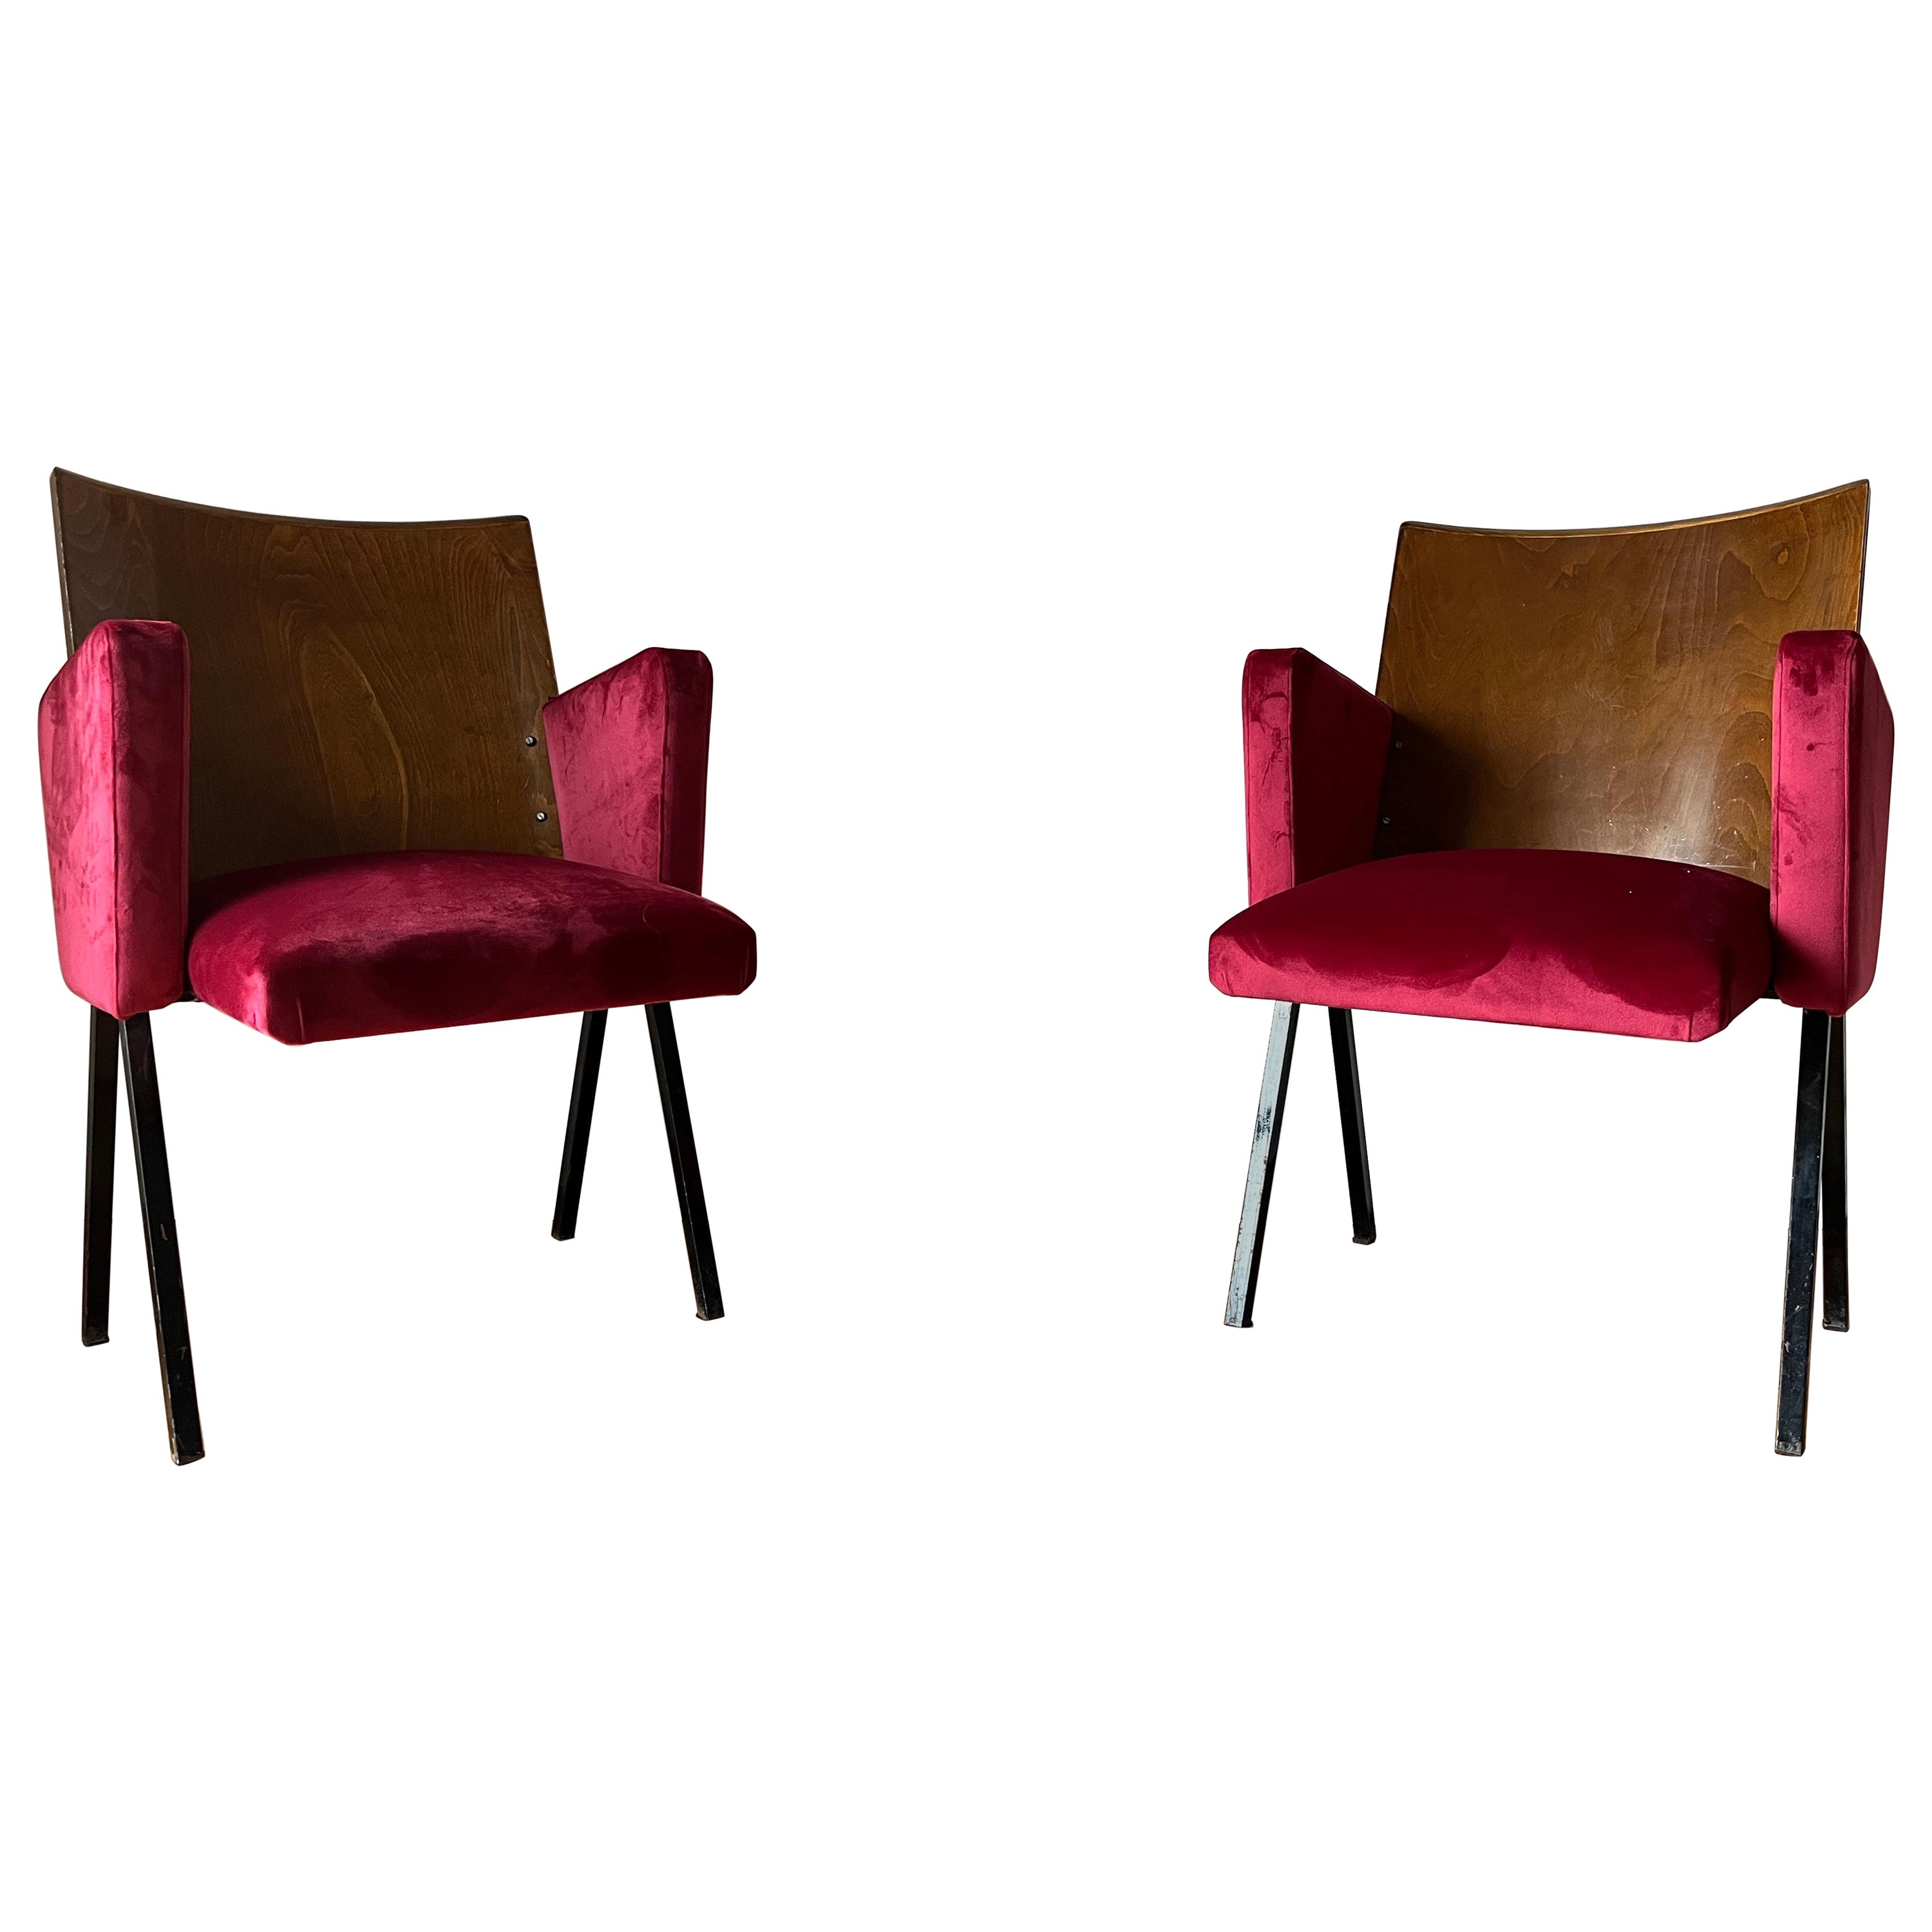 Pair of Theatre Red Chairs, 1950s For Sale